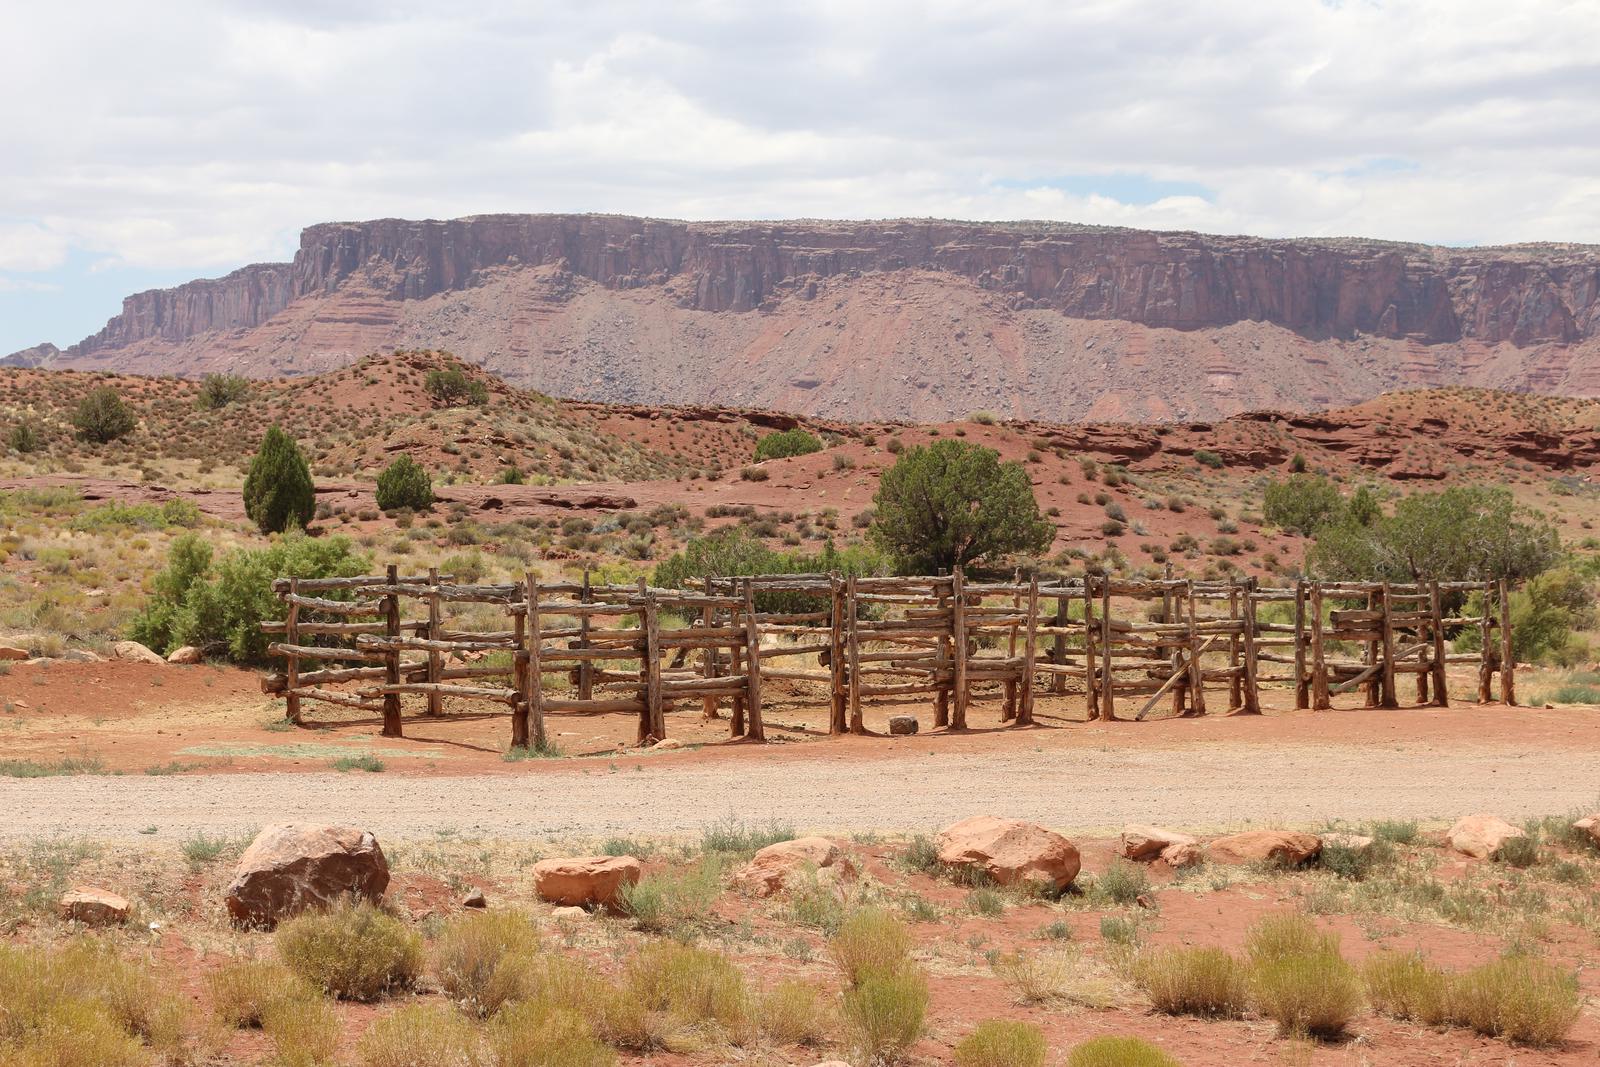 The horse corral at Upper Onion Creek Group Site A is a rail fence. It is located right next to the access road to the site. In the distance are the tall plateaus that surround Fisher Valley.